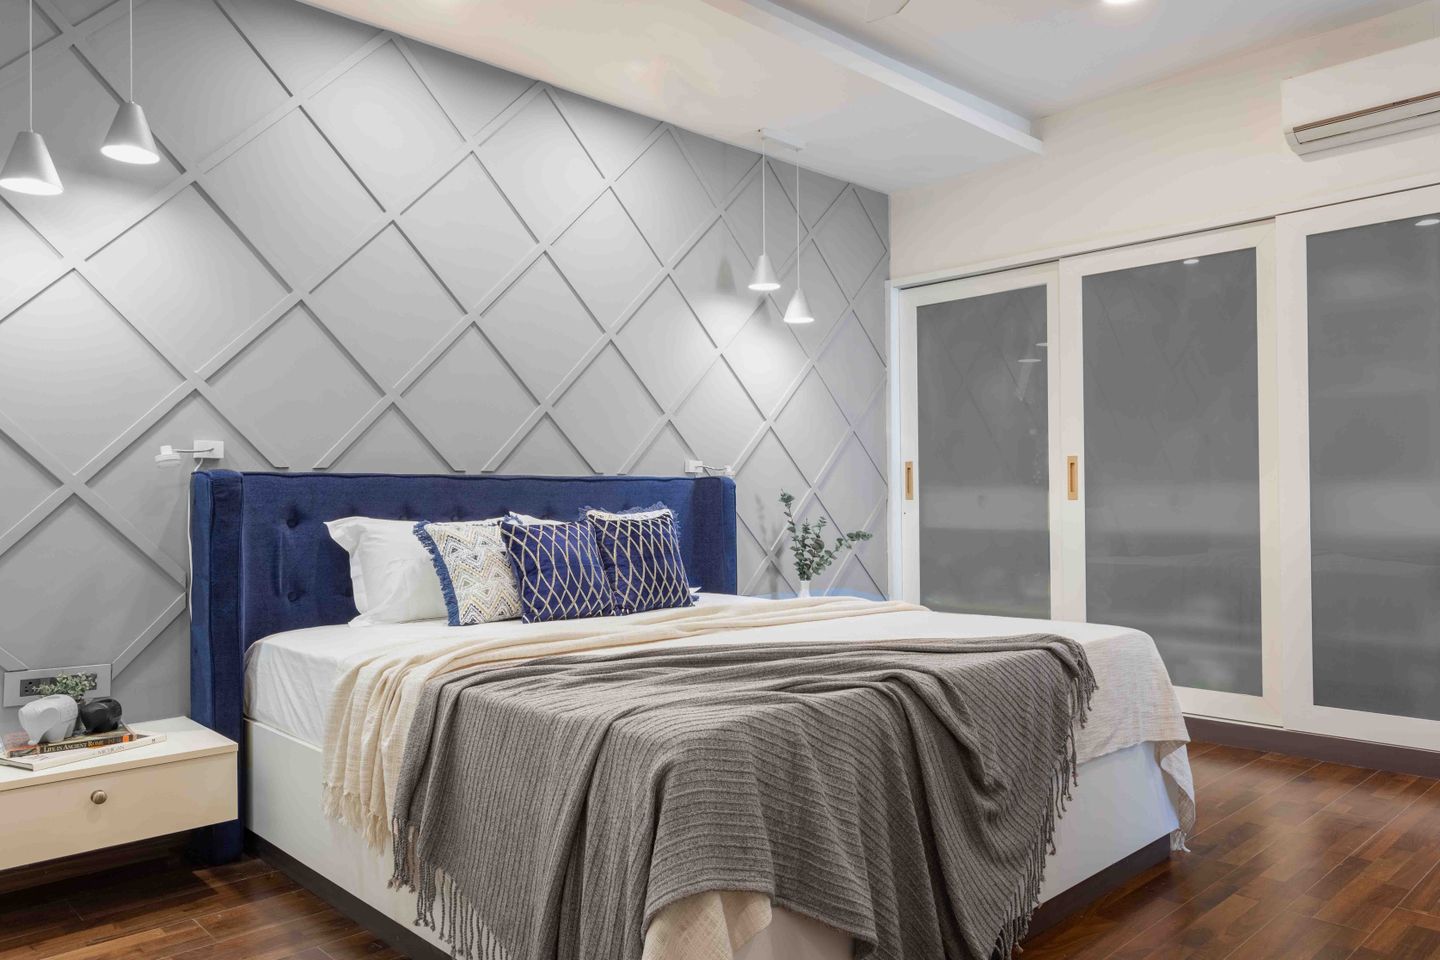 Master Bedroom Design With Grey Accent Wall - Livspace